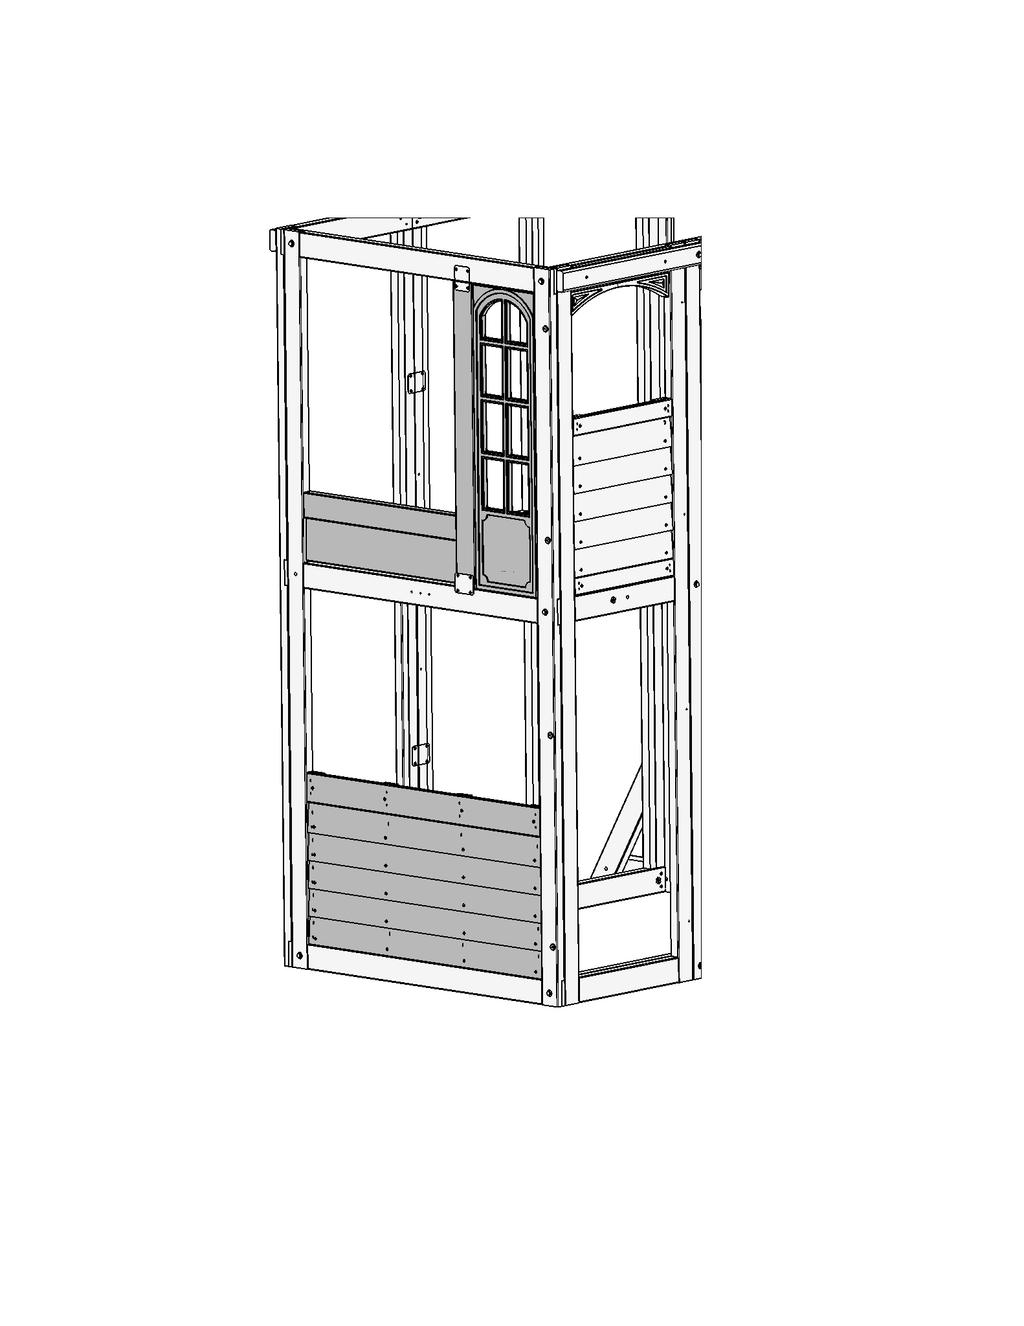 8) Fig. 12.5 Fig. 12.6 Outside View MOD Side Lite 2602 8935 2665 End Wall Fig. 12.7 Inside View 2665 MOD Side Lite Fig. 12.8 Inside View 8935 Tight S0 S0 x 14 S0 Wood Parts 1 x Half Wall Insert 1.